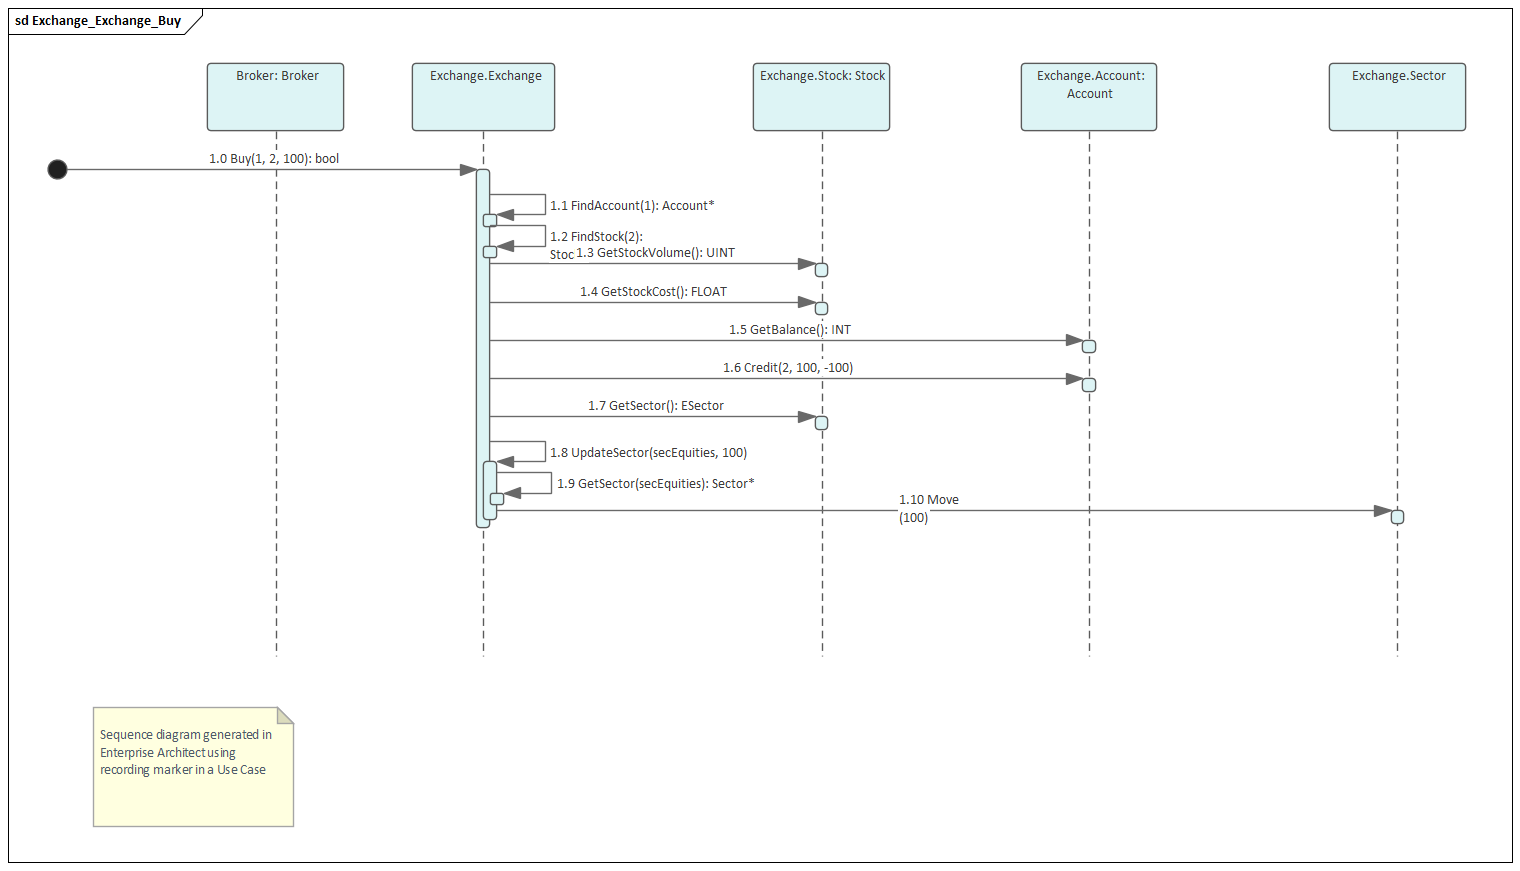 Sequence diagram created in Visual Execution Analysis, Sparx Systems Enterprise Architect.